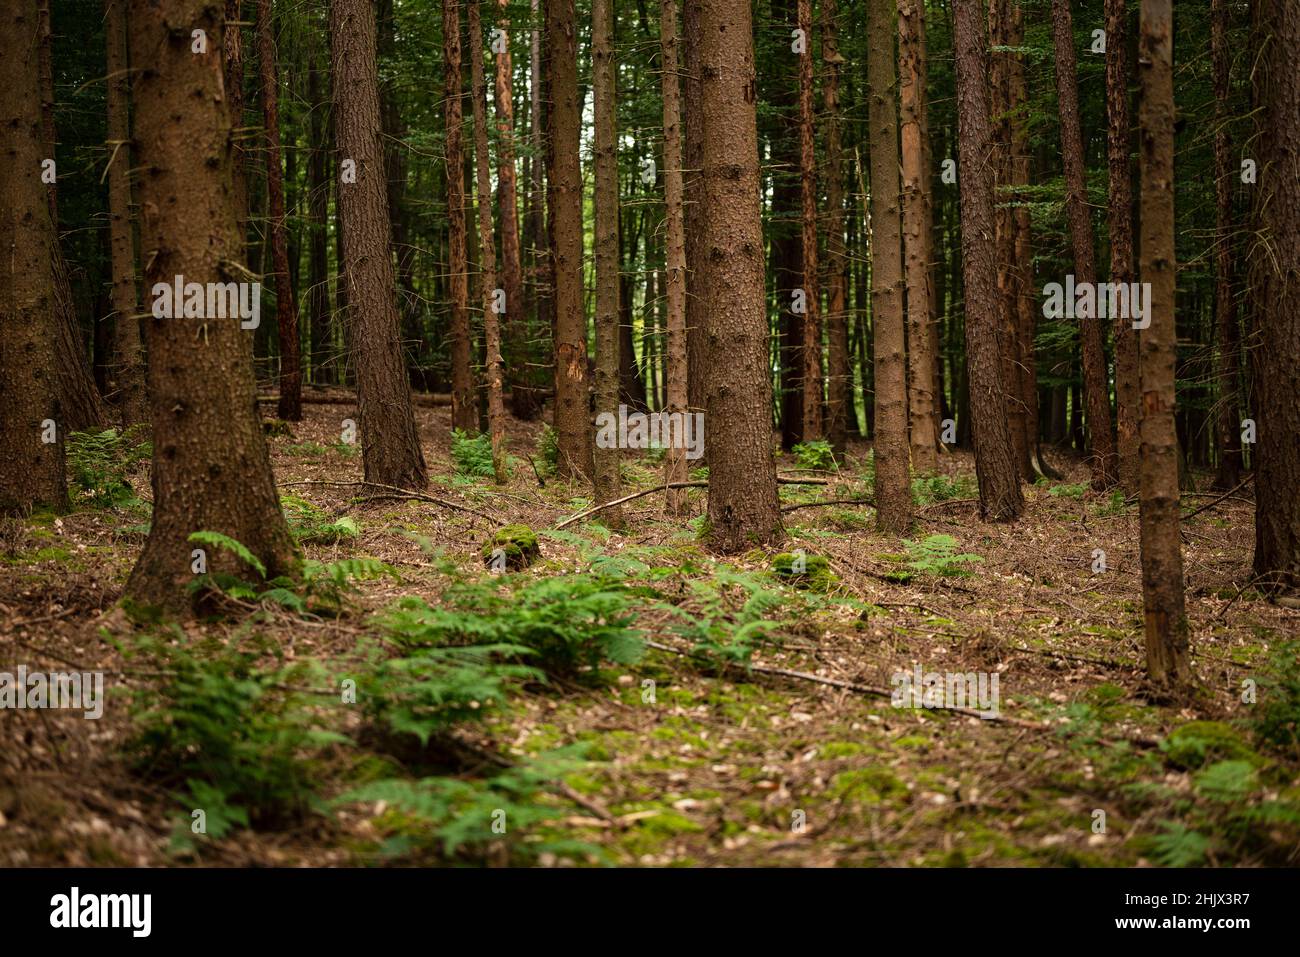 Trunks of fir trees in a coniferous forest with moss and fern on the floor, Weserbergland ,Germany Stock Photo